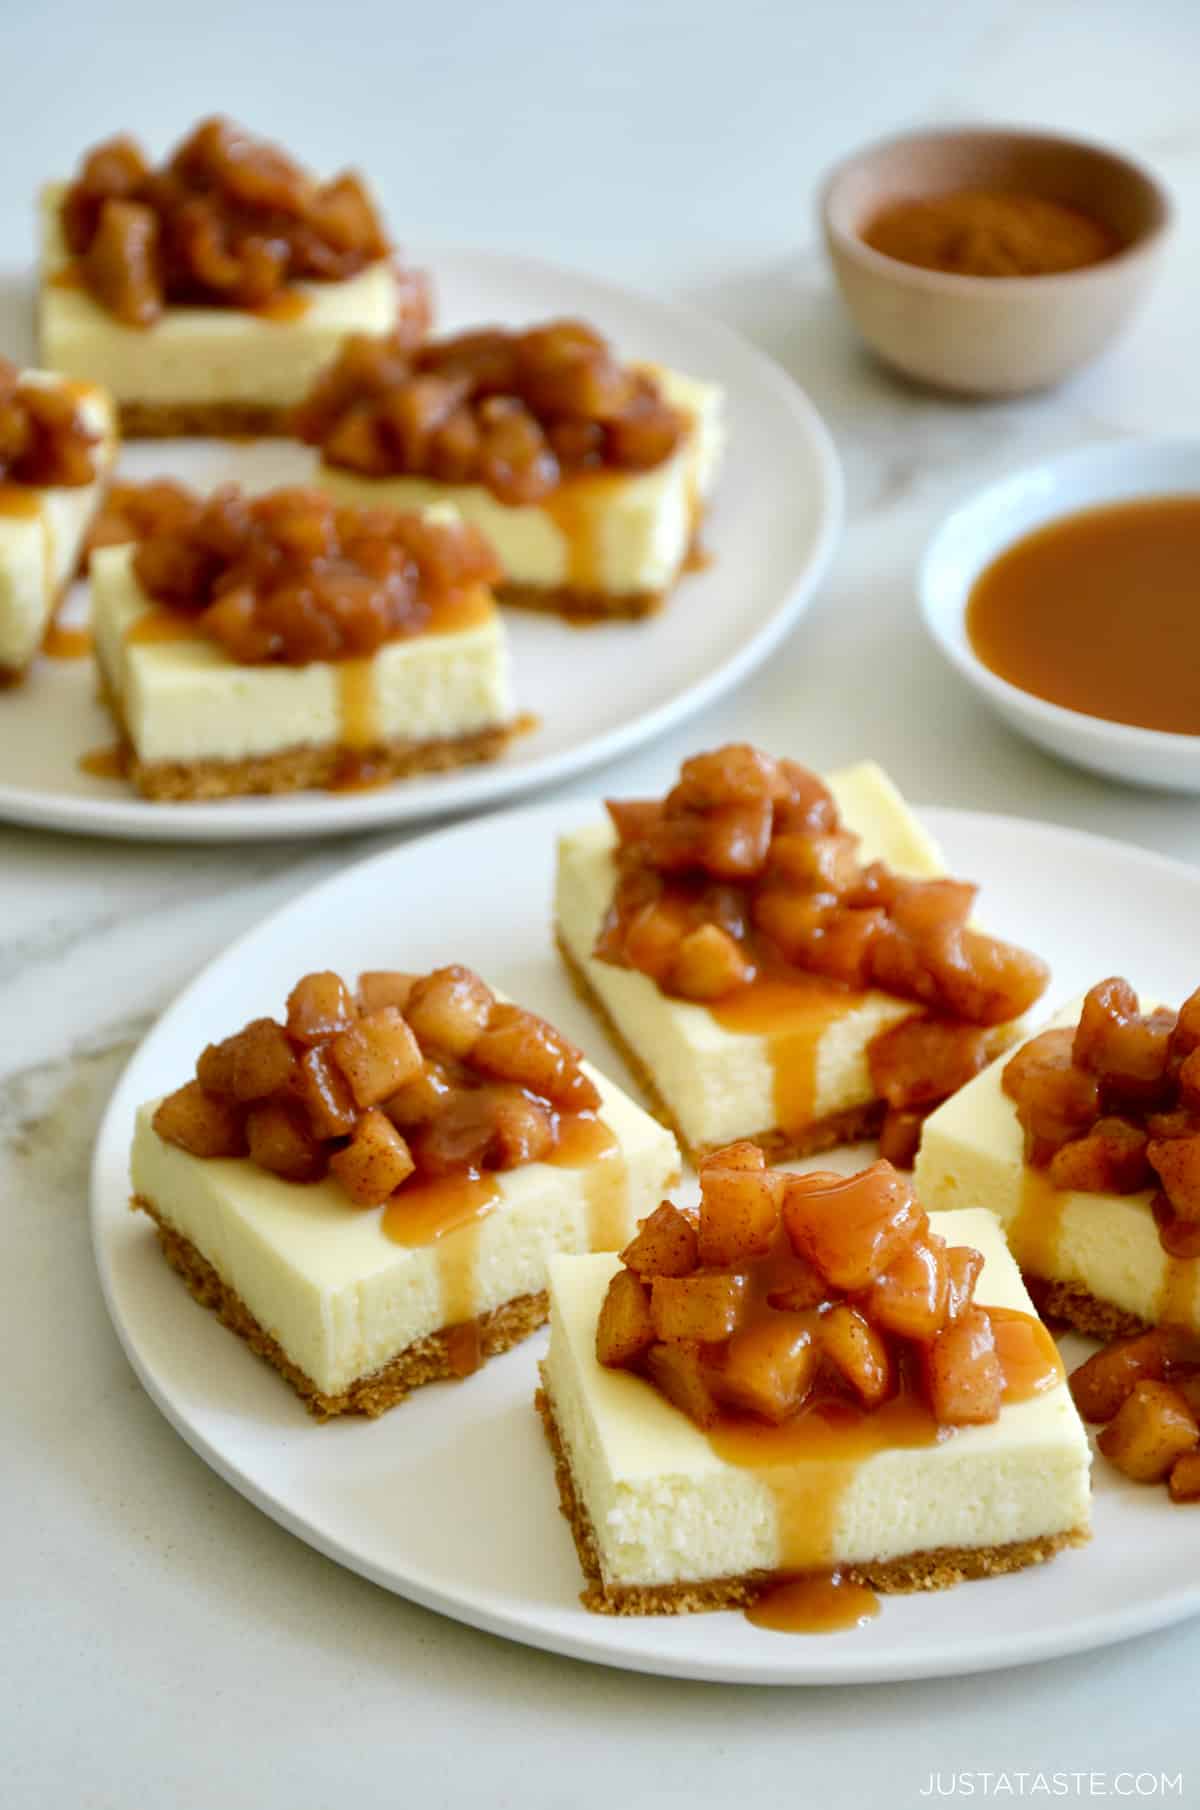 Cheesecake bars topped with sautéed apples and drizzled with caramel sauce on a white plate.